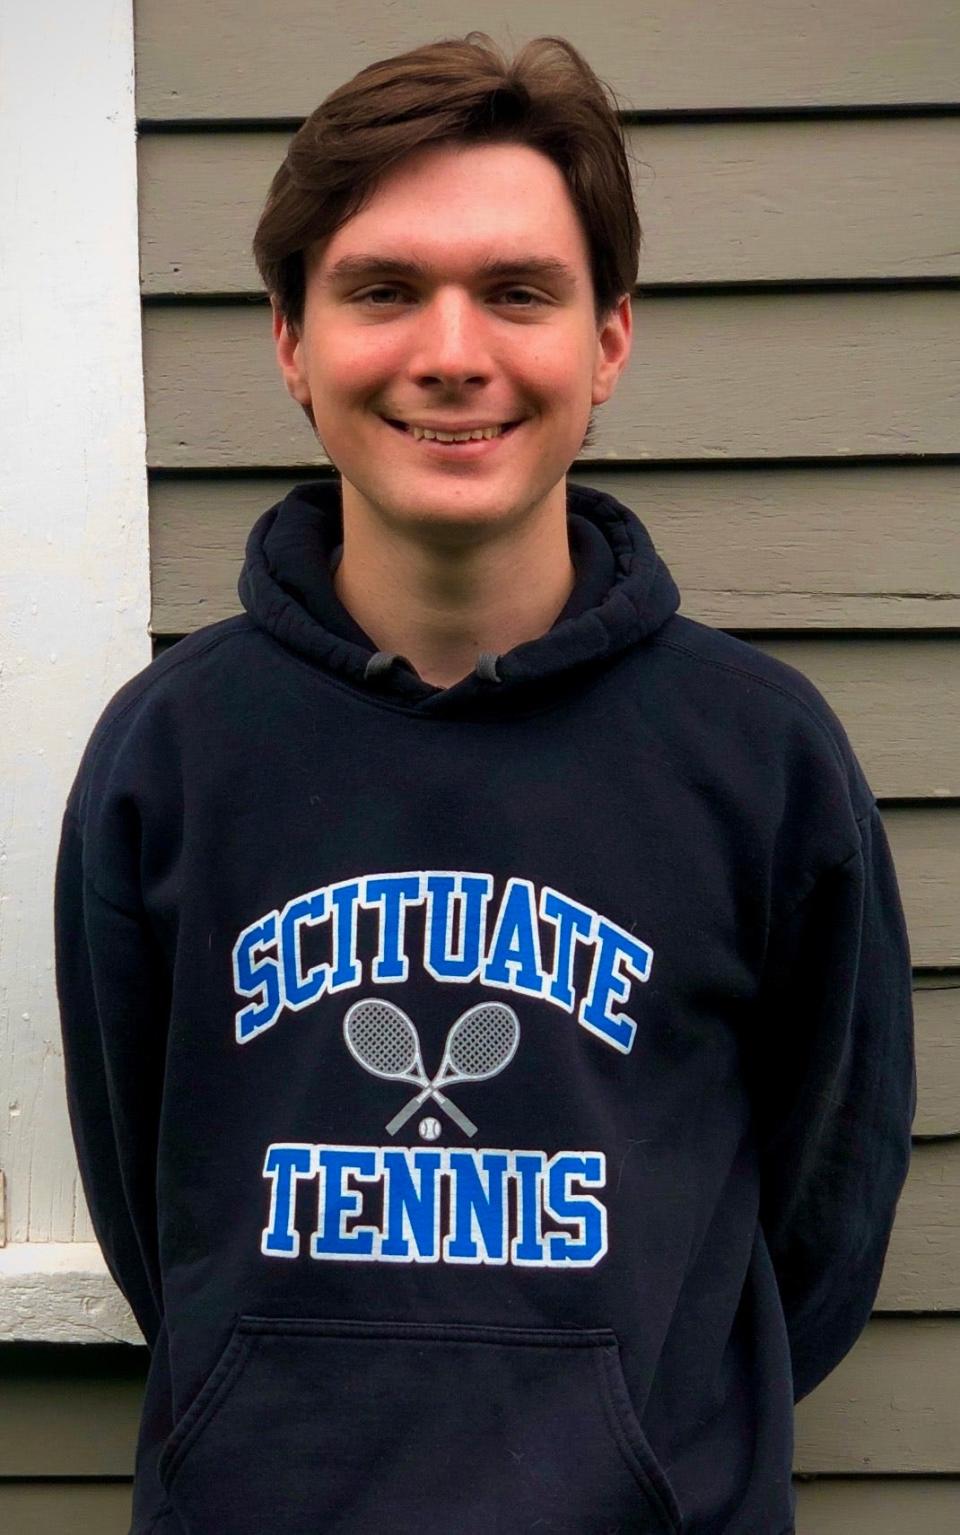 Benjamin DiPesa of Scituate High has been named to The Patriot Ledger/Enterprise Boys Tennis All-Scholastic Team.